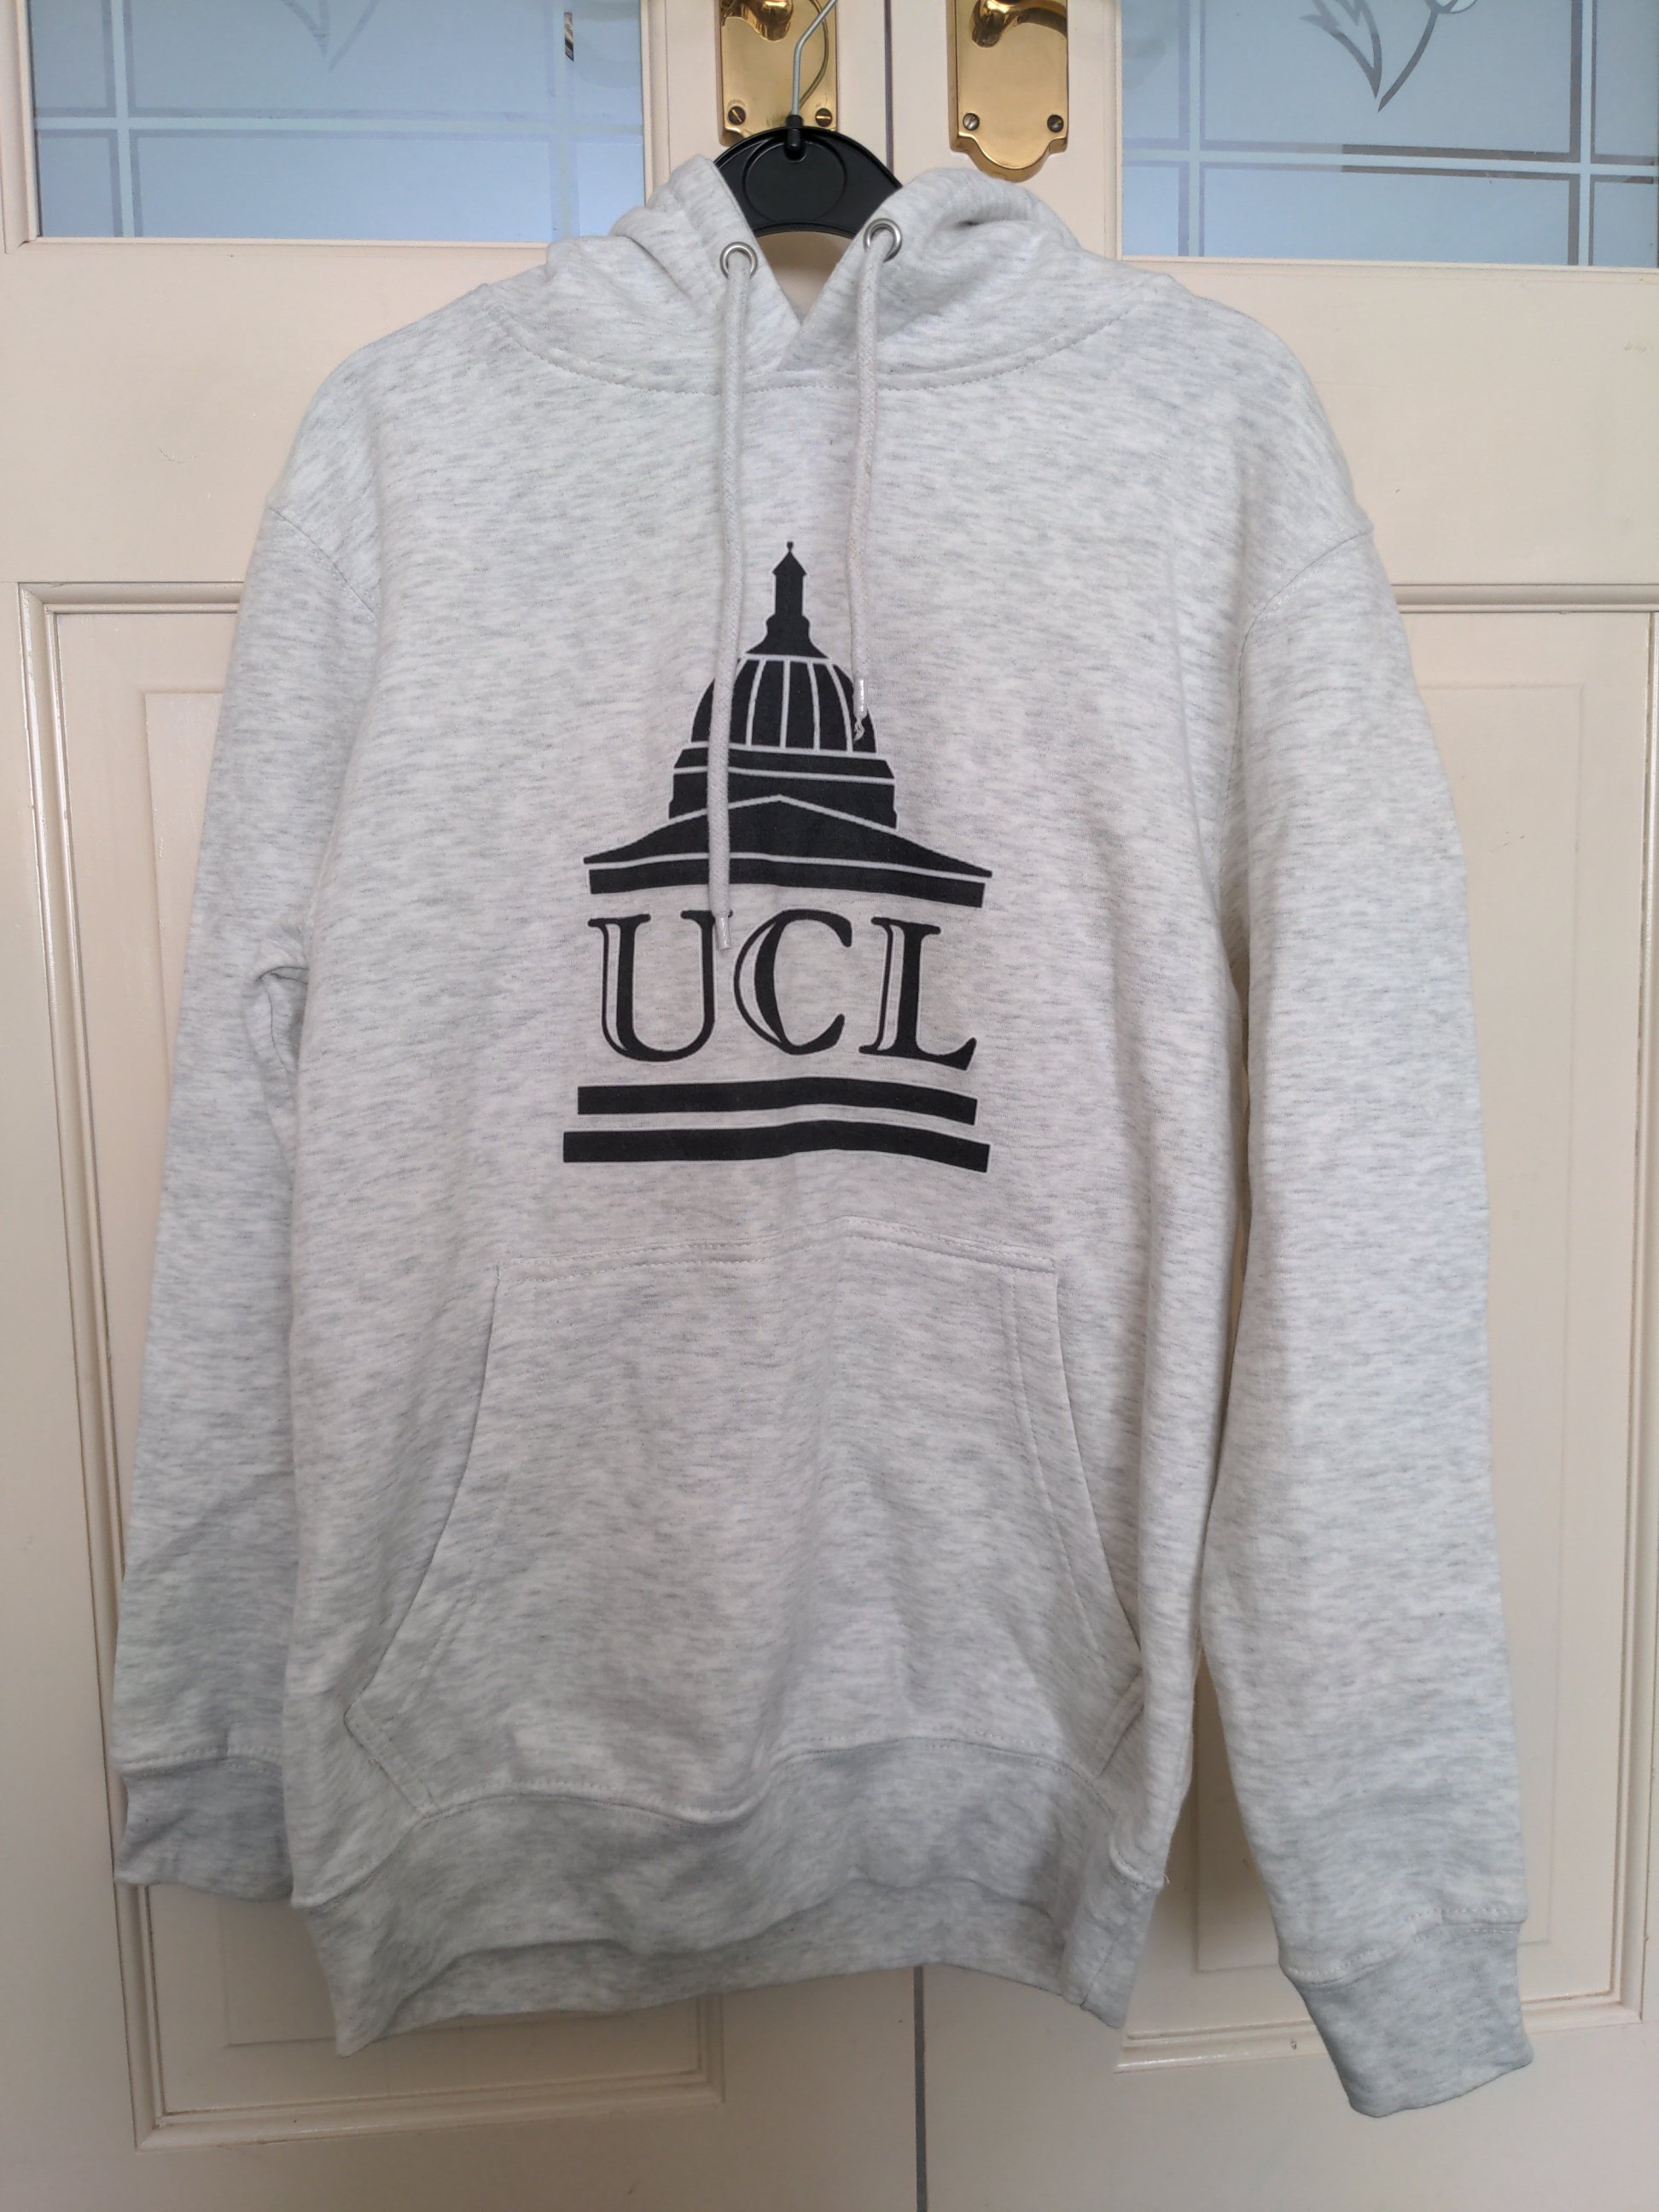 Heather white hoodie emblazoned with a black illustration of UCL's portico and featuring the letters 'UCL' in the middle